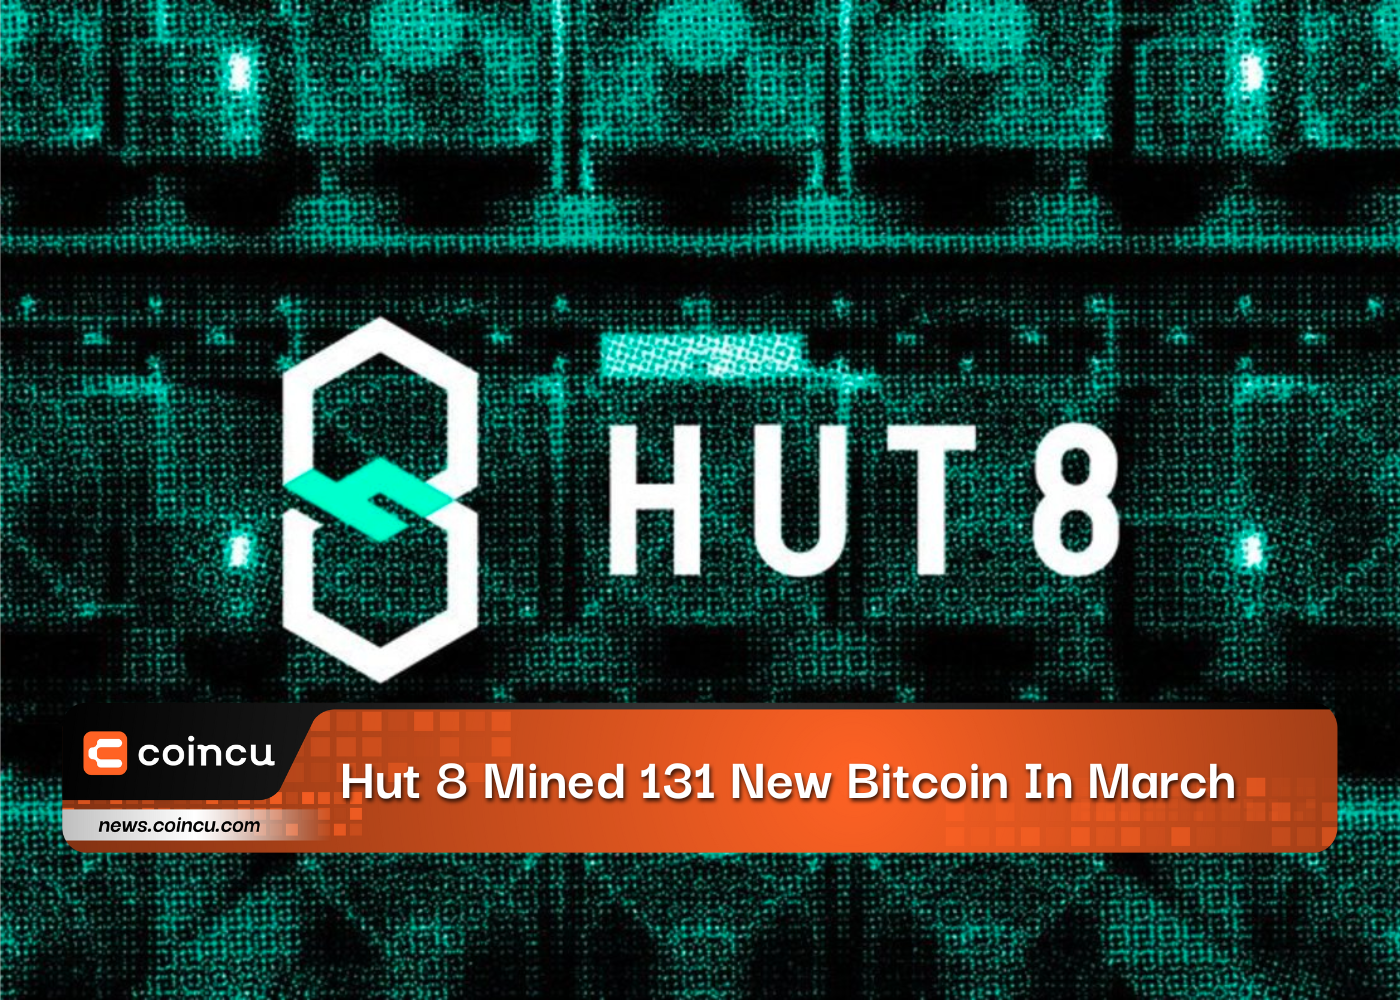 Hut 8 Mined 131 New Bitcoin In March